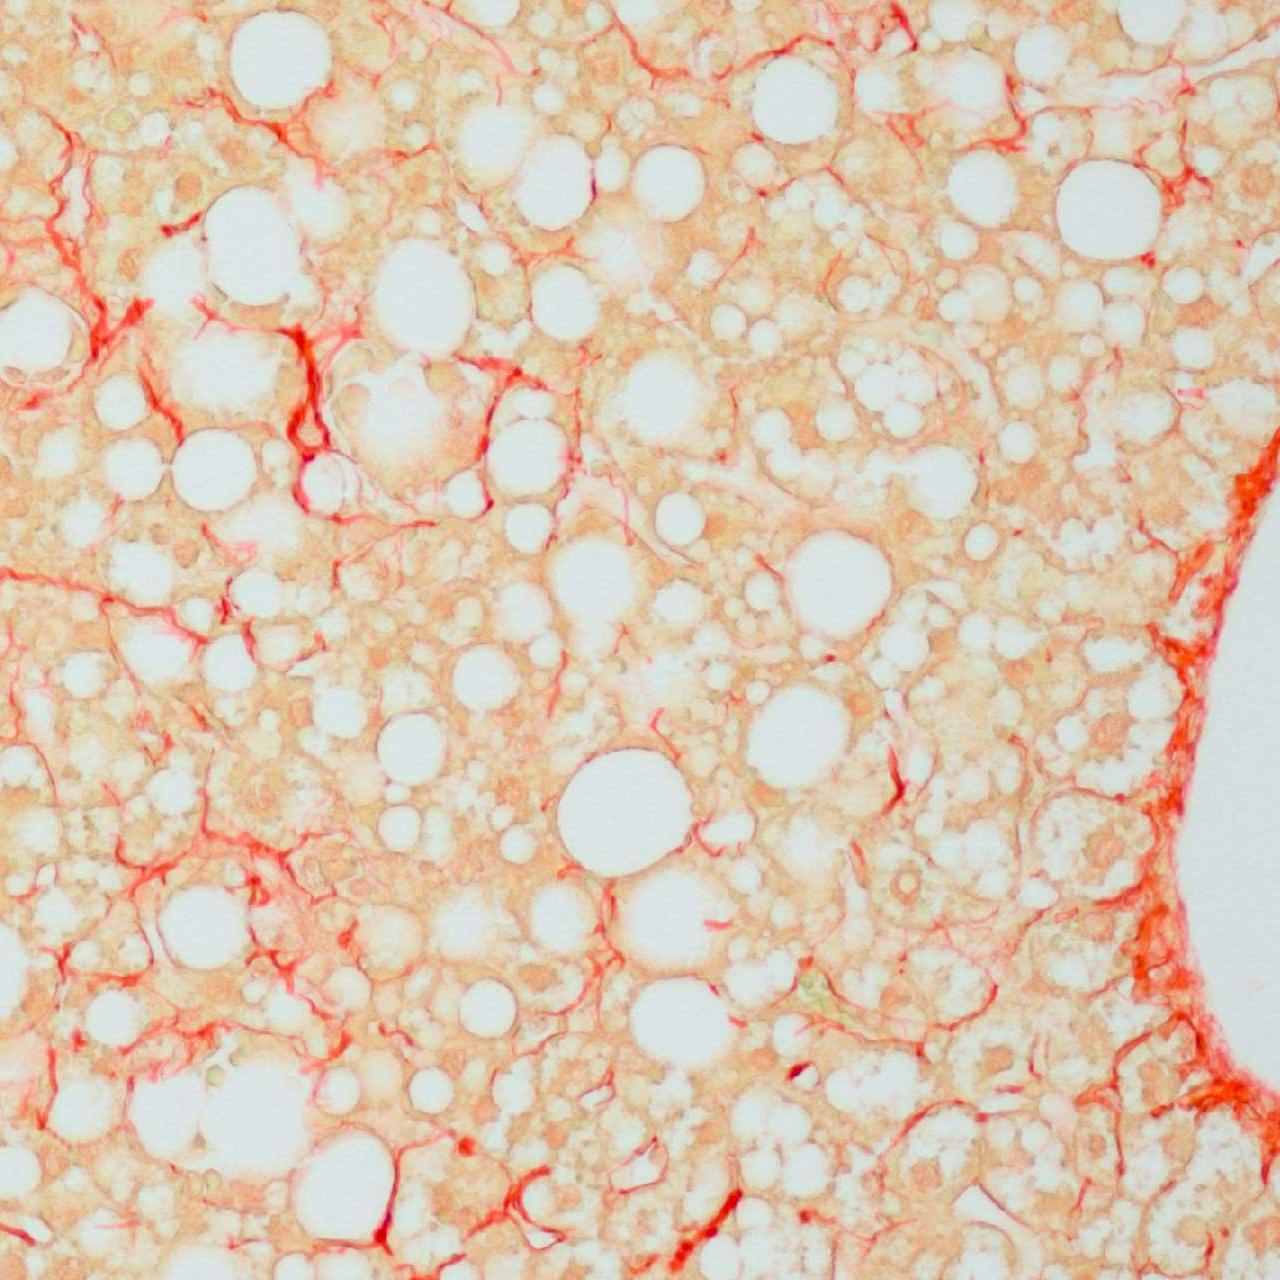 Mouse liver with connective collagenous tissue